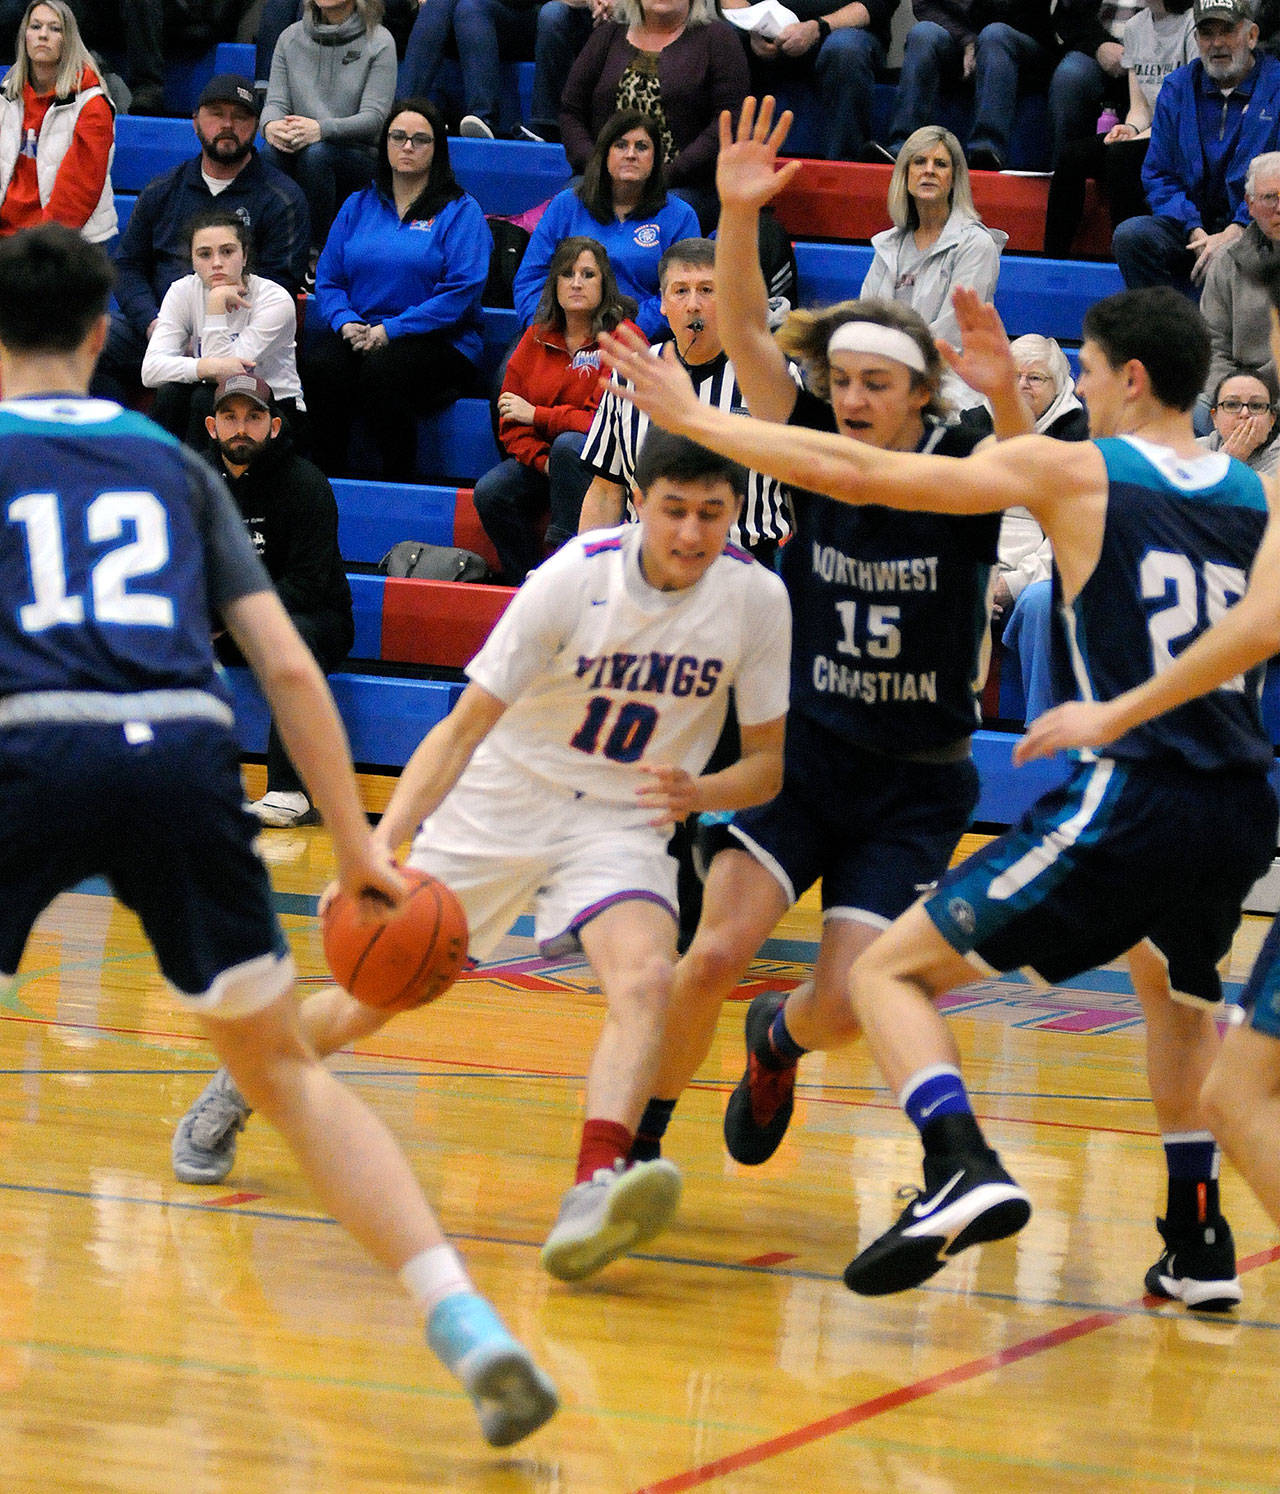 Willapa Valley’s Chad Flemetis (10), seen here against Northwest Christian on Jan. 27, is the second-leading scorer for the Vikings at 14 points per game this season. Flemetis and the Vikings will take on Friday Harbor in the 2B regionals on Saturday. (Ryan Sparks | Grays Harbor News Group)